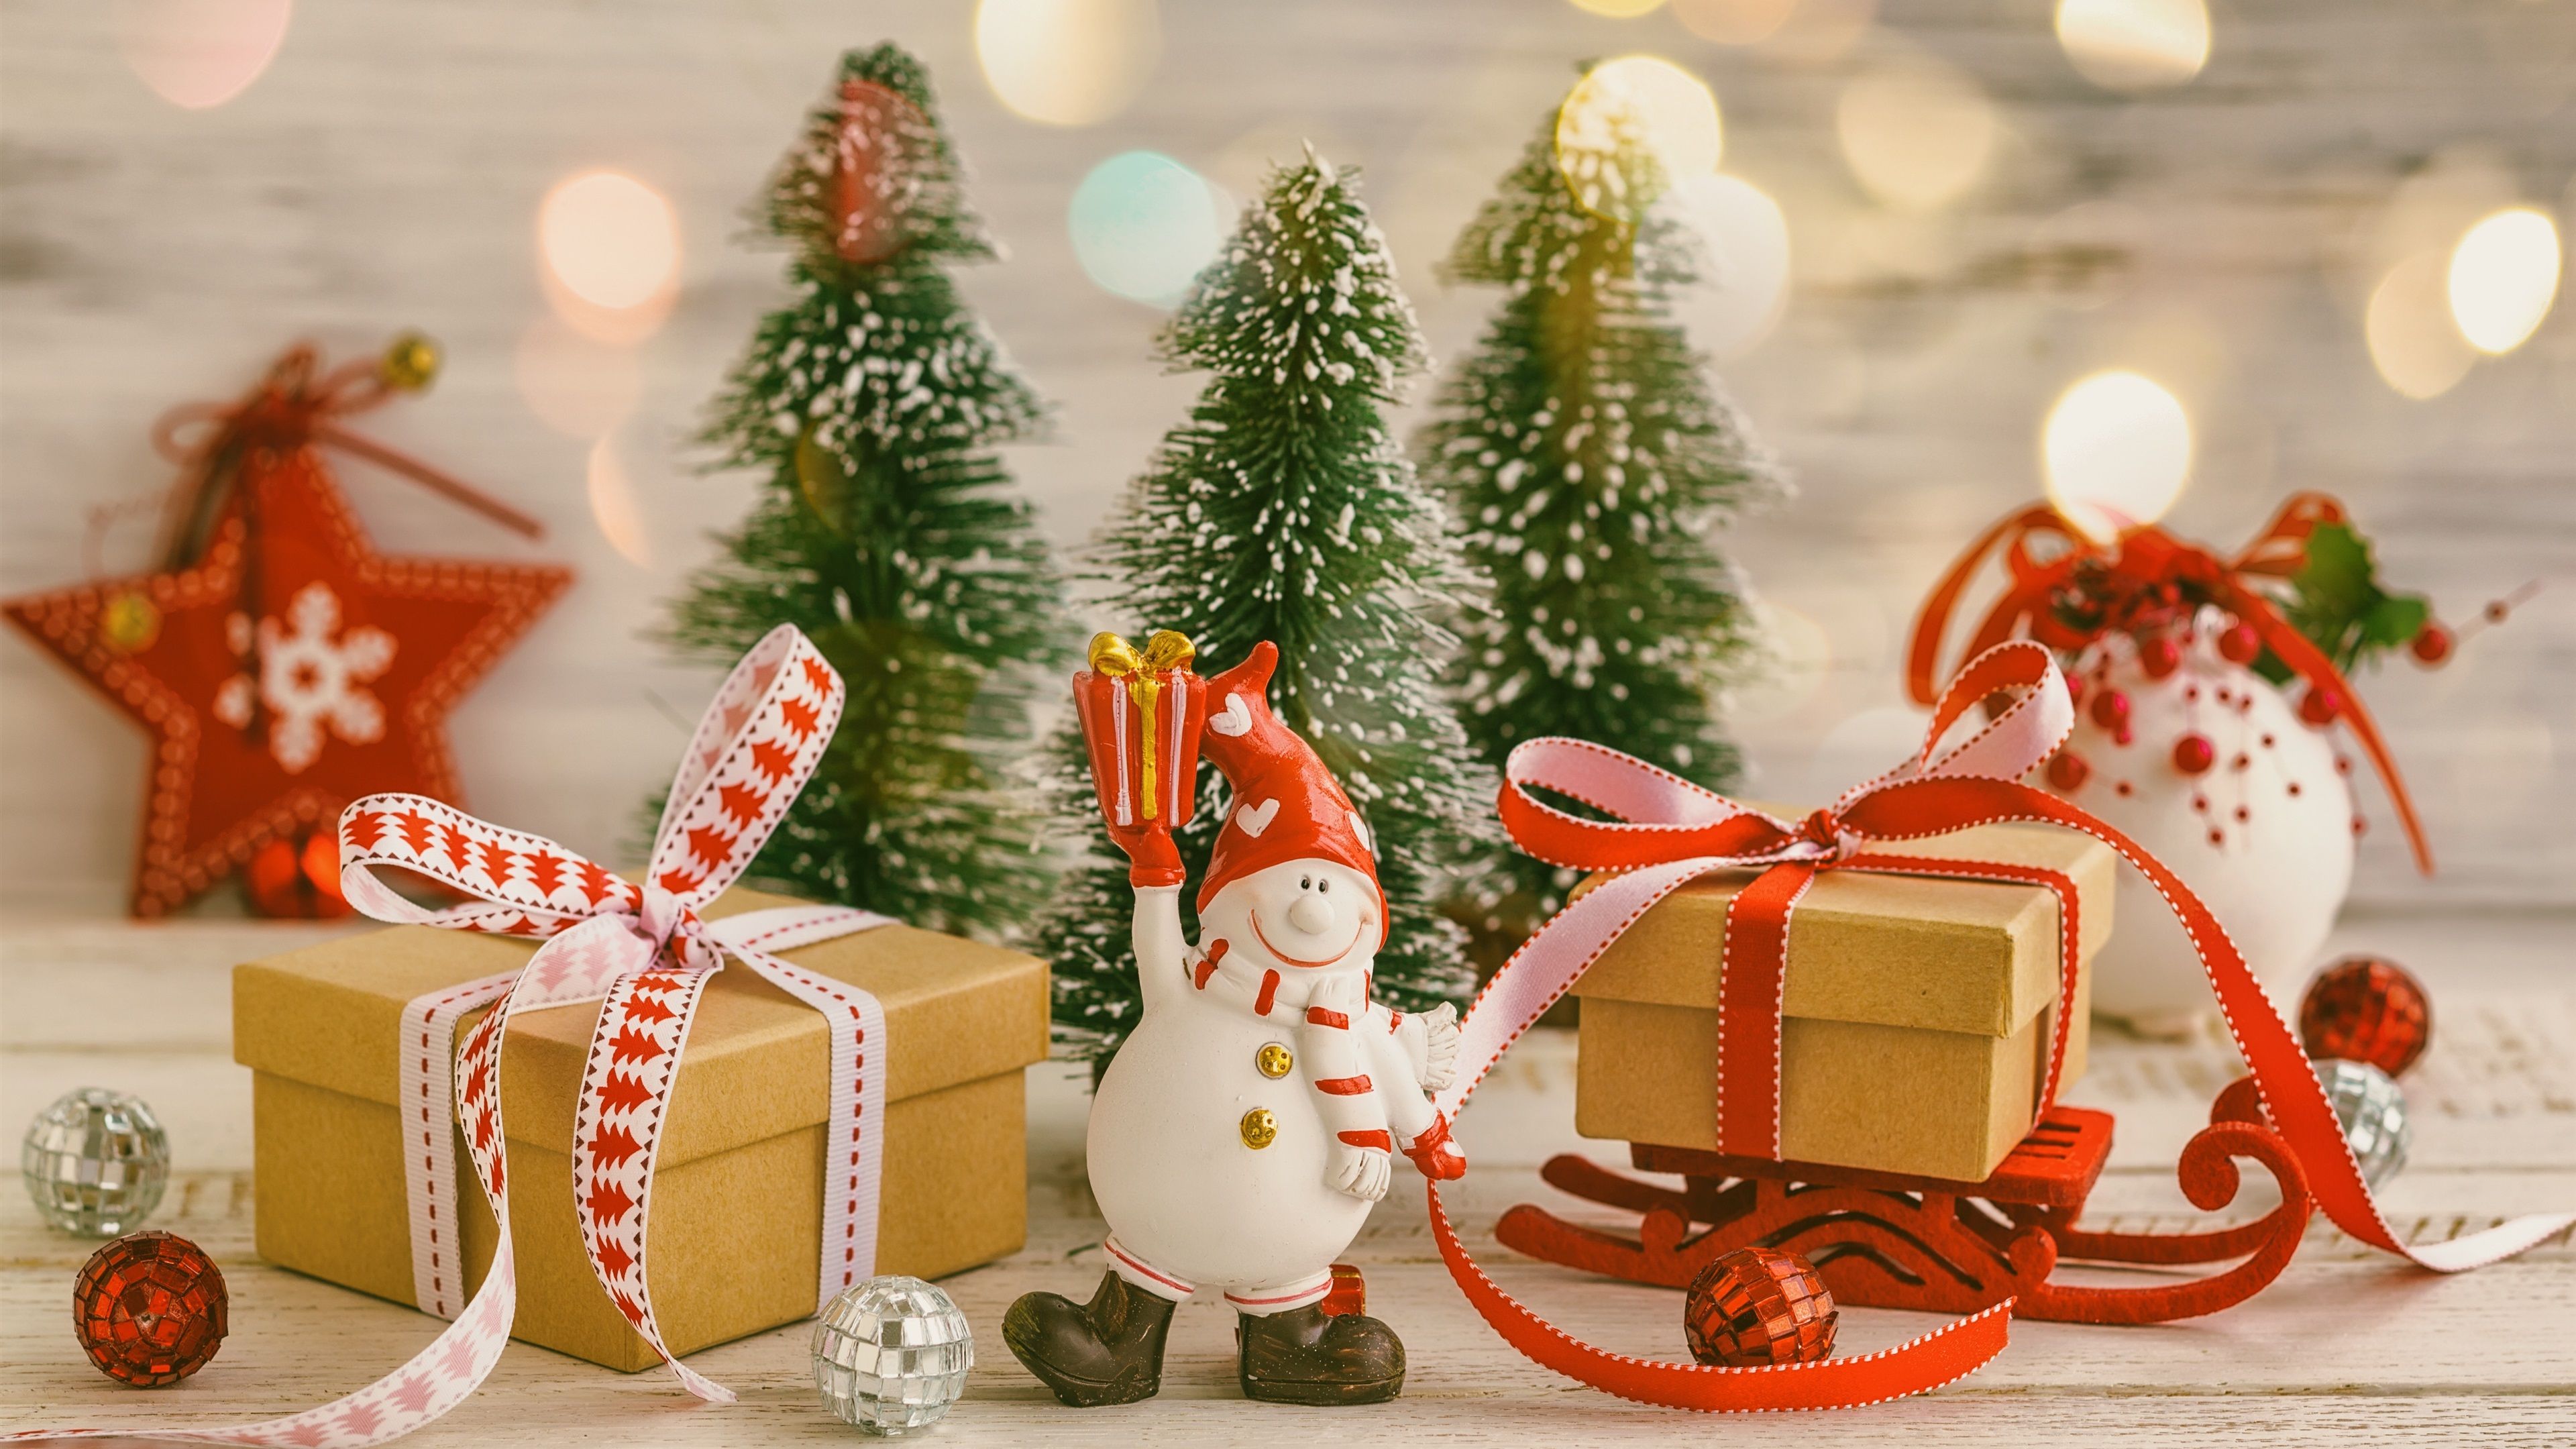 Wallpaper Gift, snowman toy, Christmas trees 3840x2160 UHD 4K Picture, Image